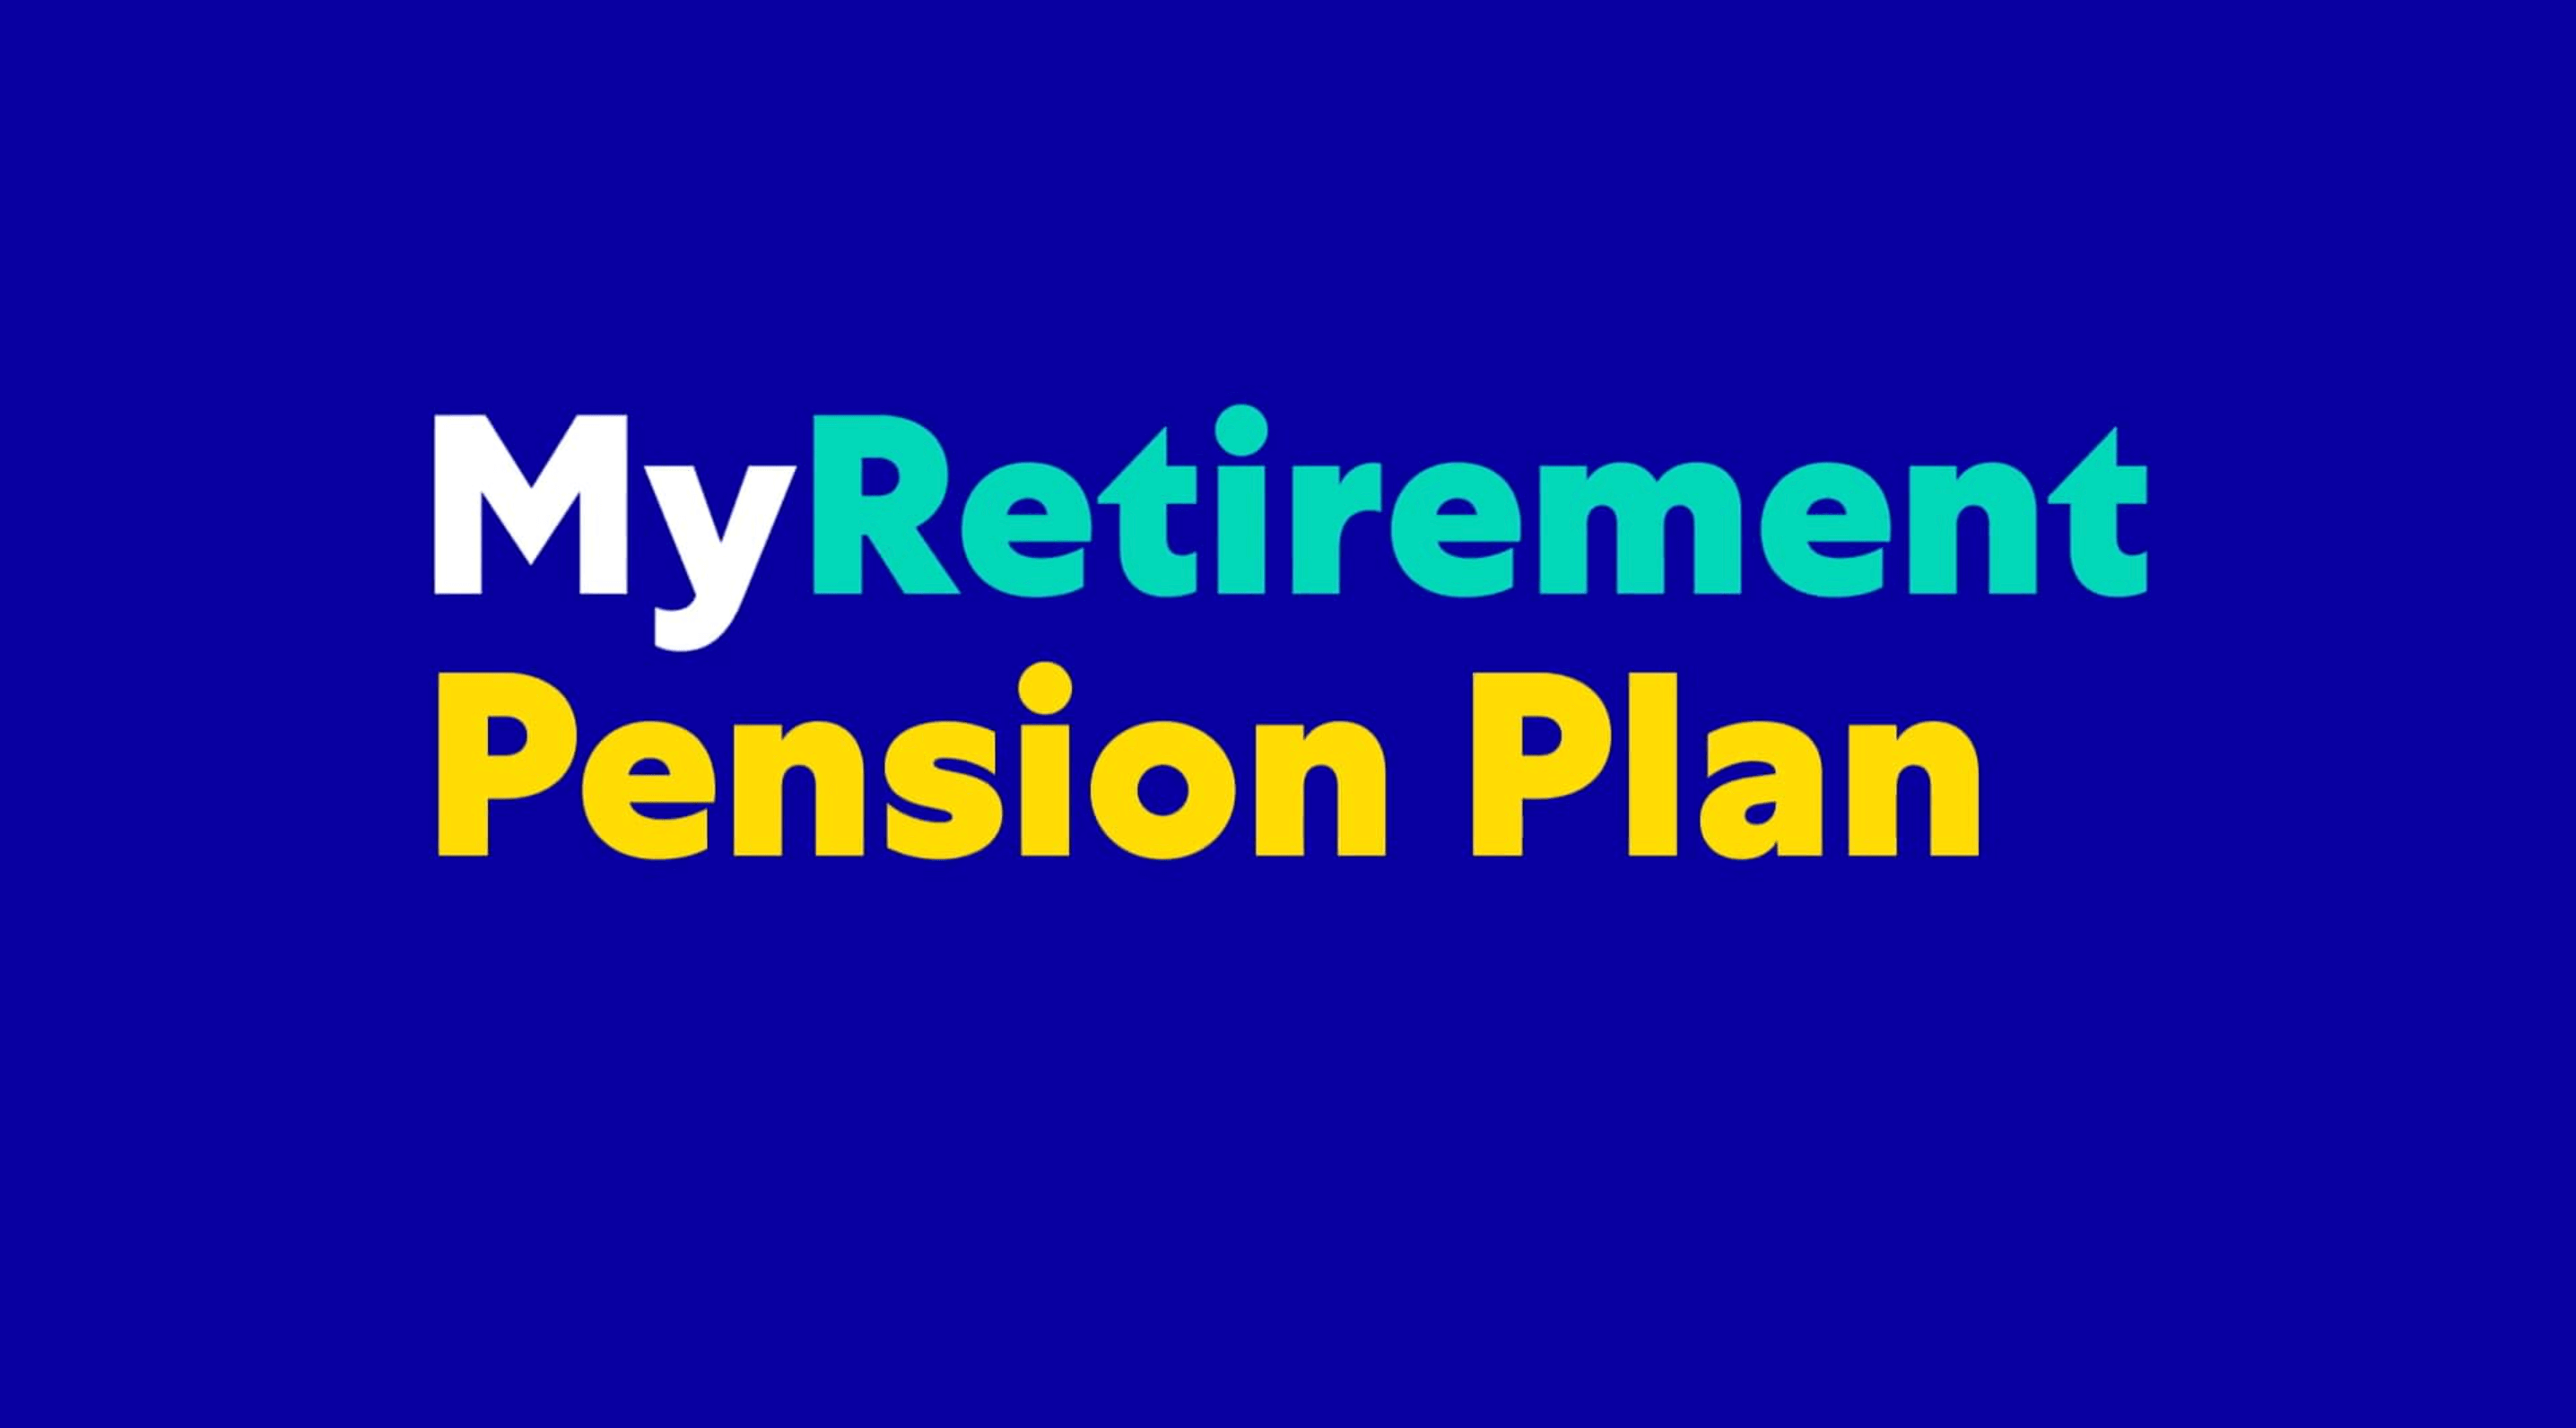 video introducing the pension plan